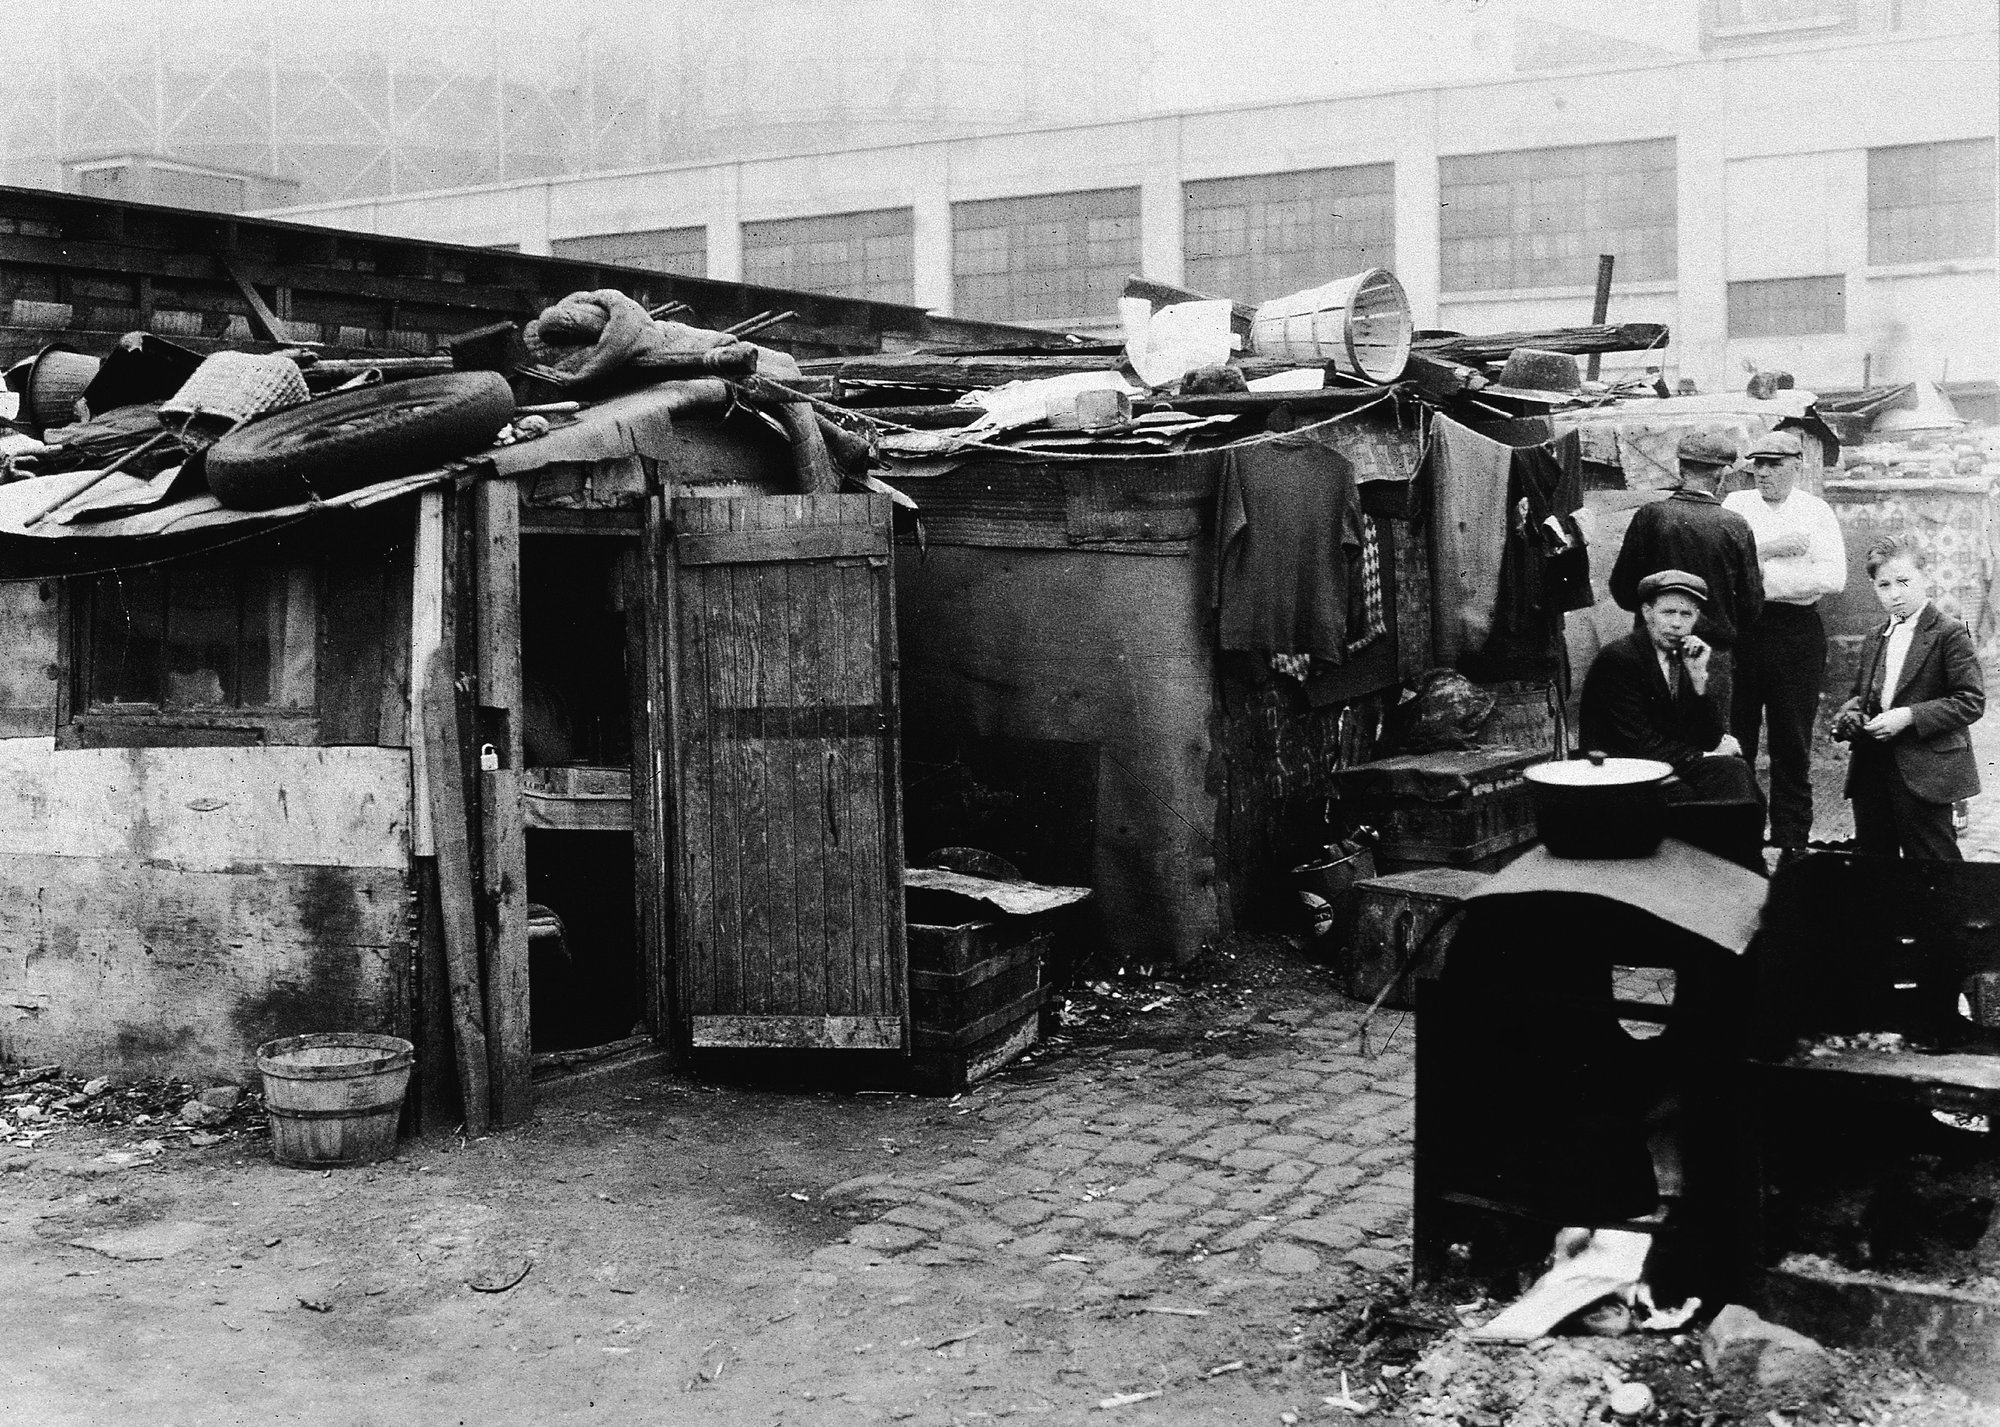 Black-and-white photograph of people standing in front of makeshift housing shacks - American Stock Archive // Getty Images